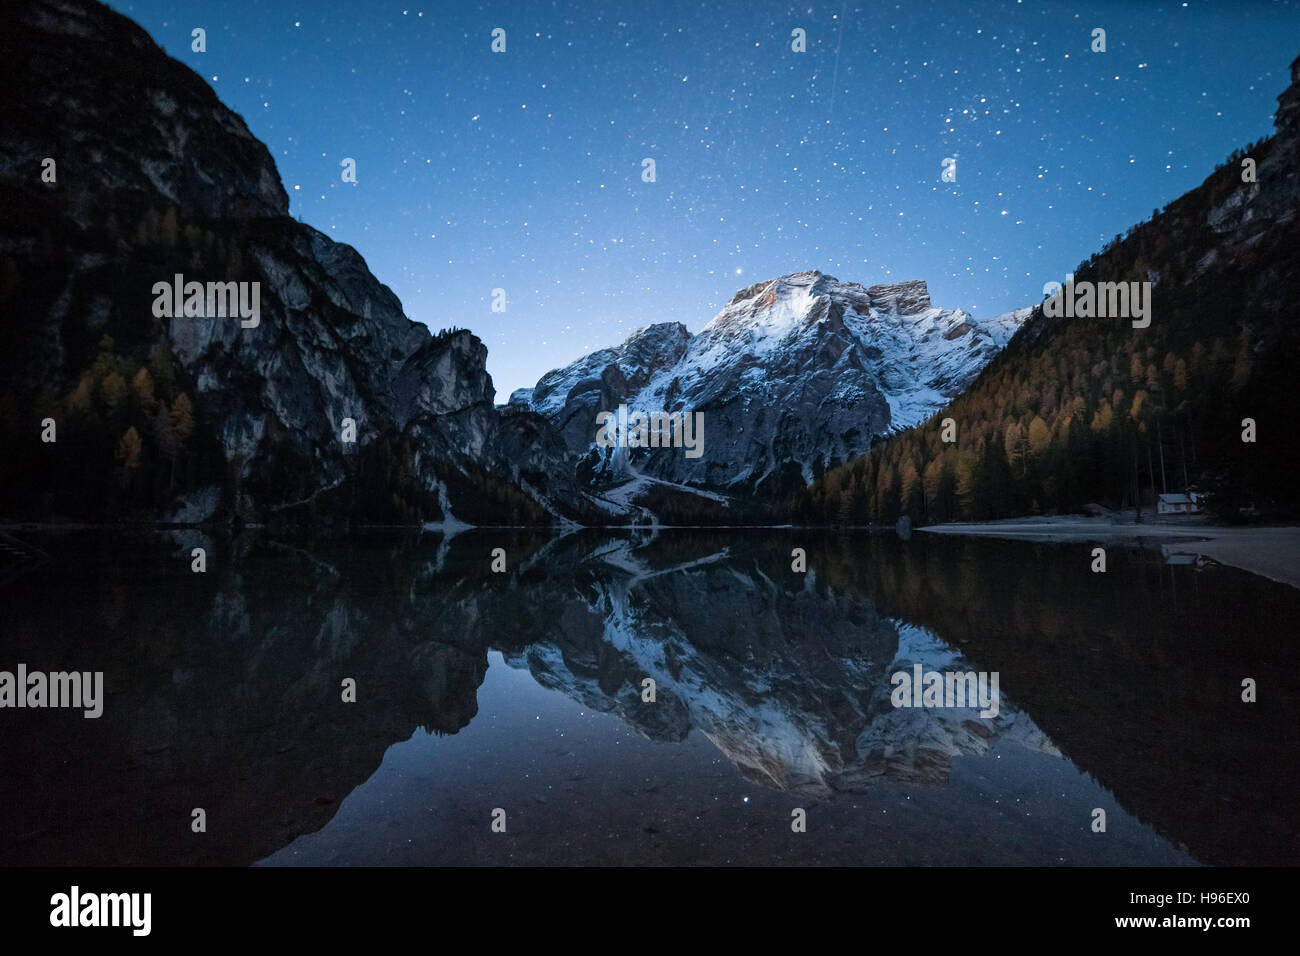 Night landscape with stars over lake and mountain, Braies, Italy Stock Photo